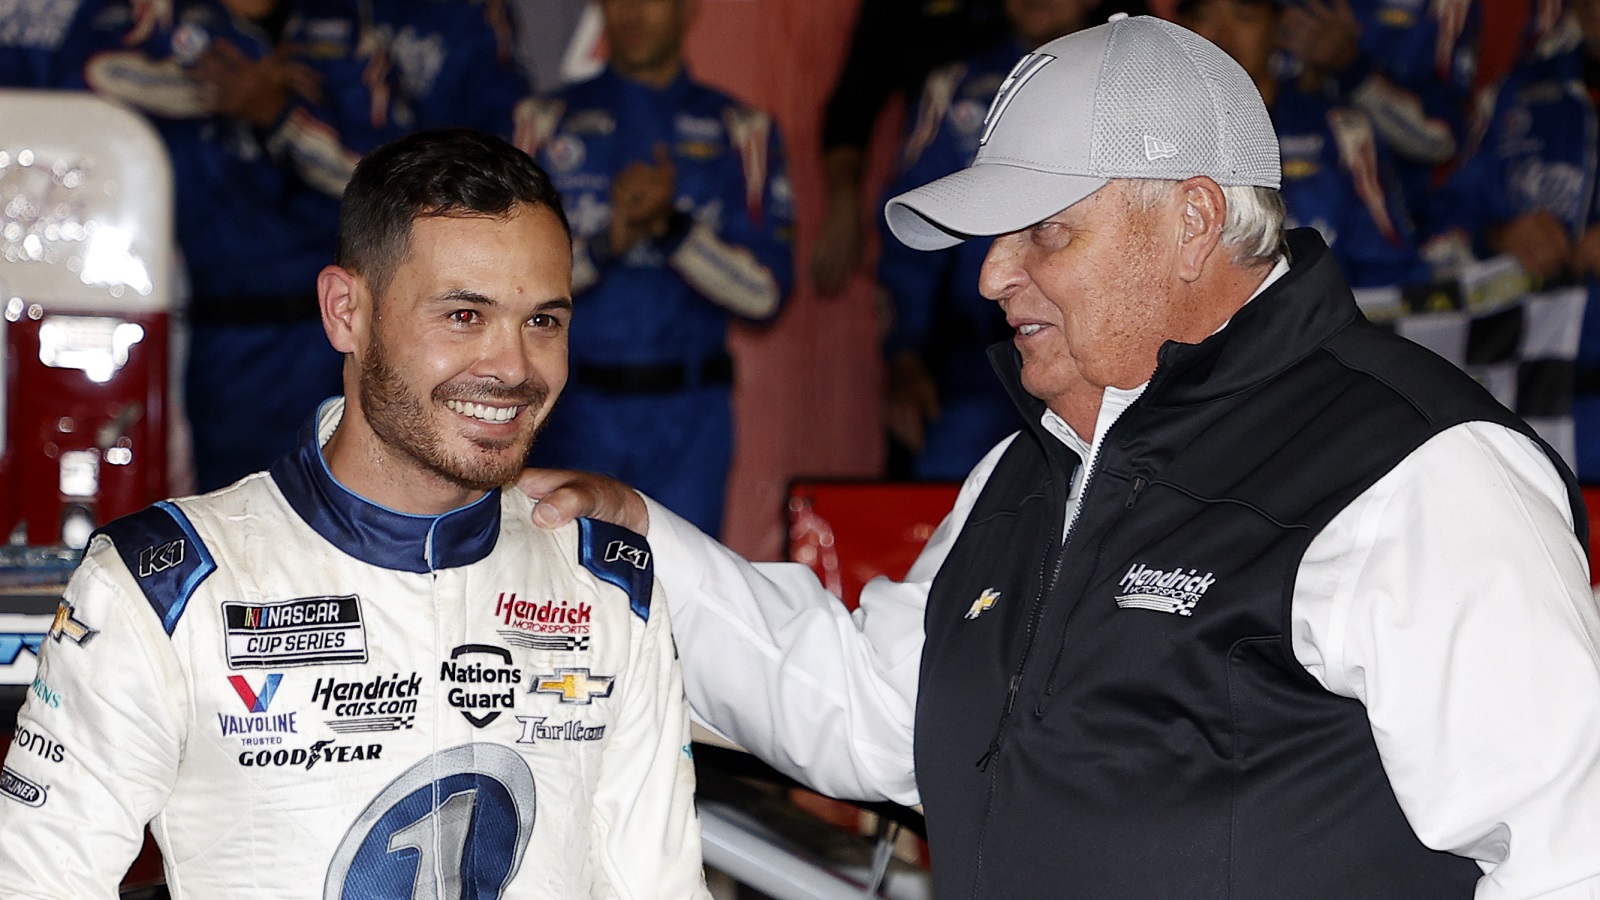 Kyle Larson and NASCAR Hall of Famer and team owner Rick Hendrick celebrate after winning the NASCAR Cup Series Coca-Cola 600 on May 30, 2021.